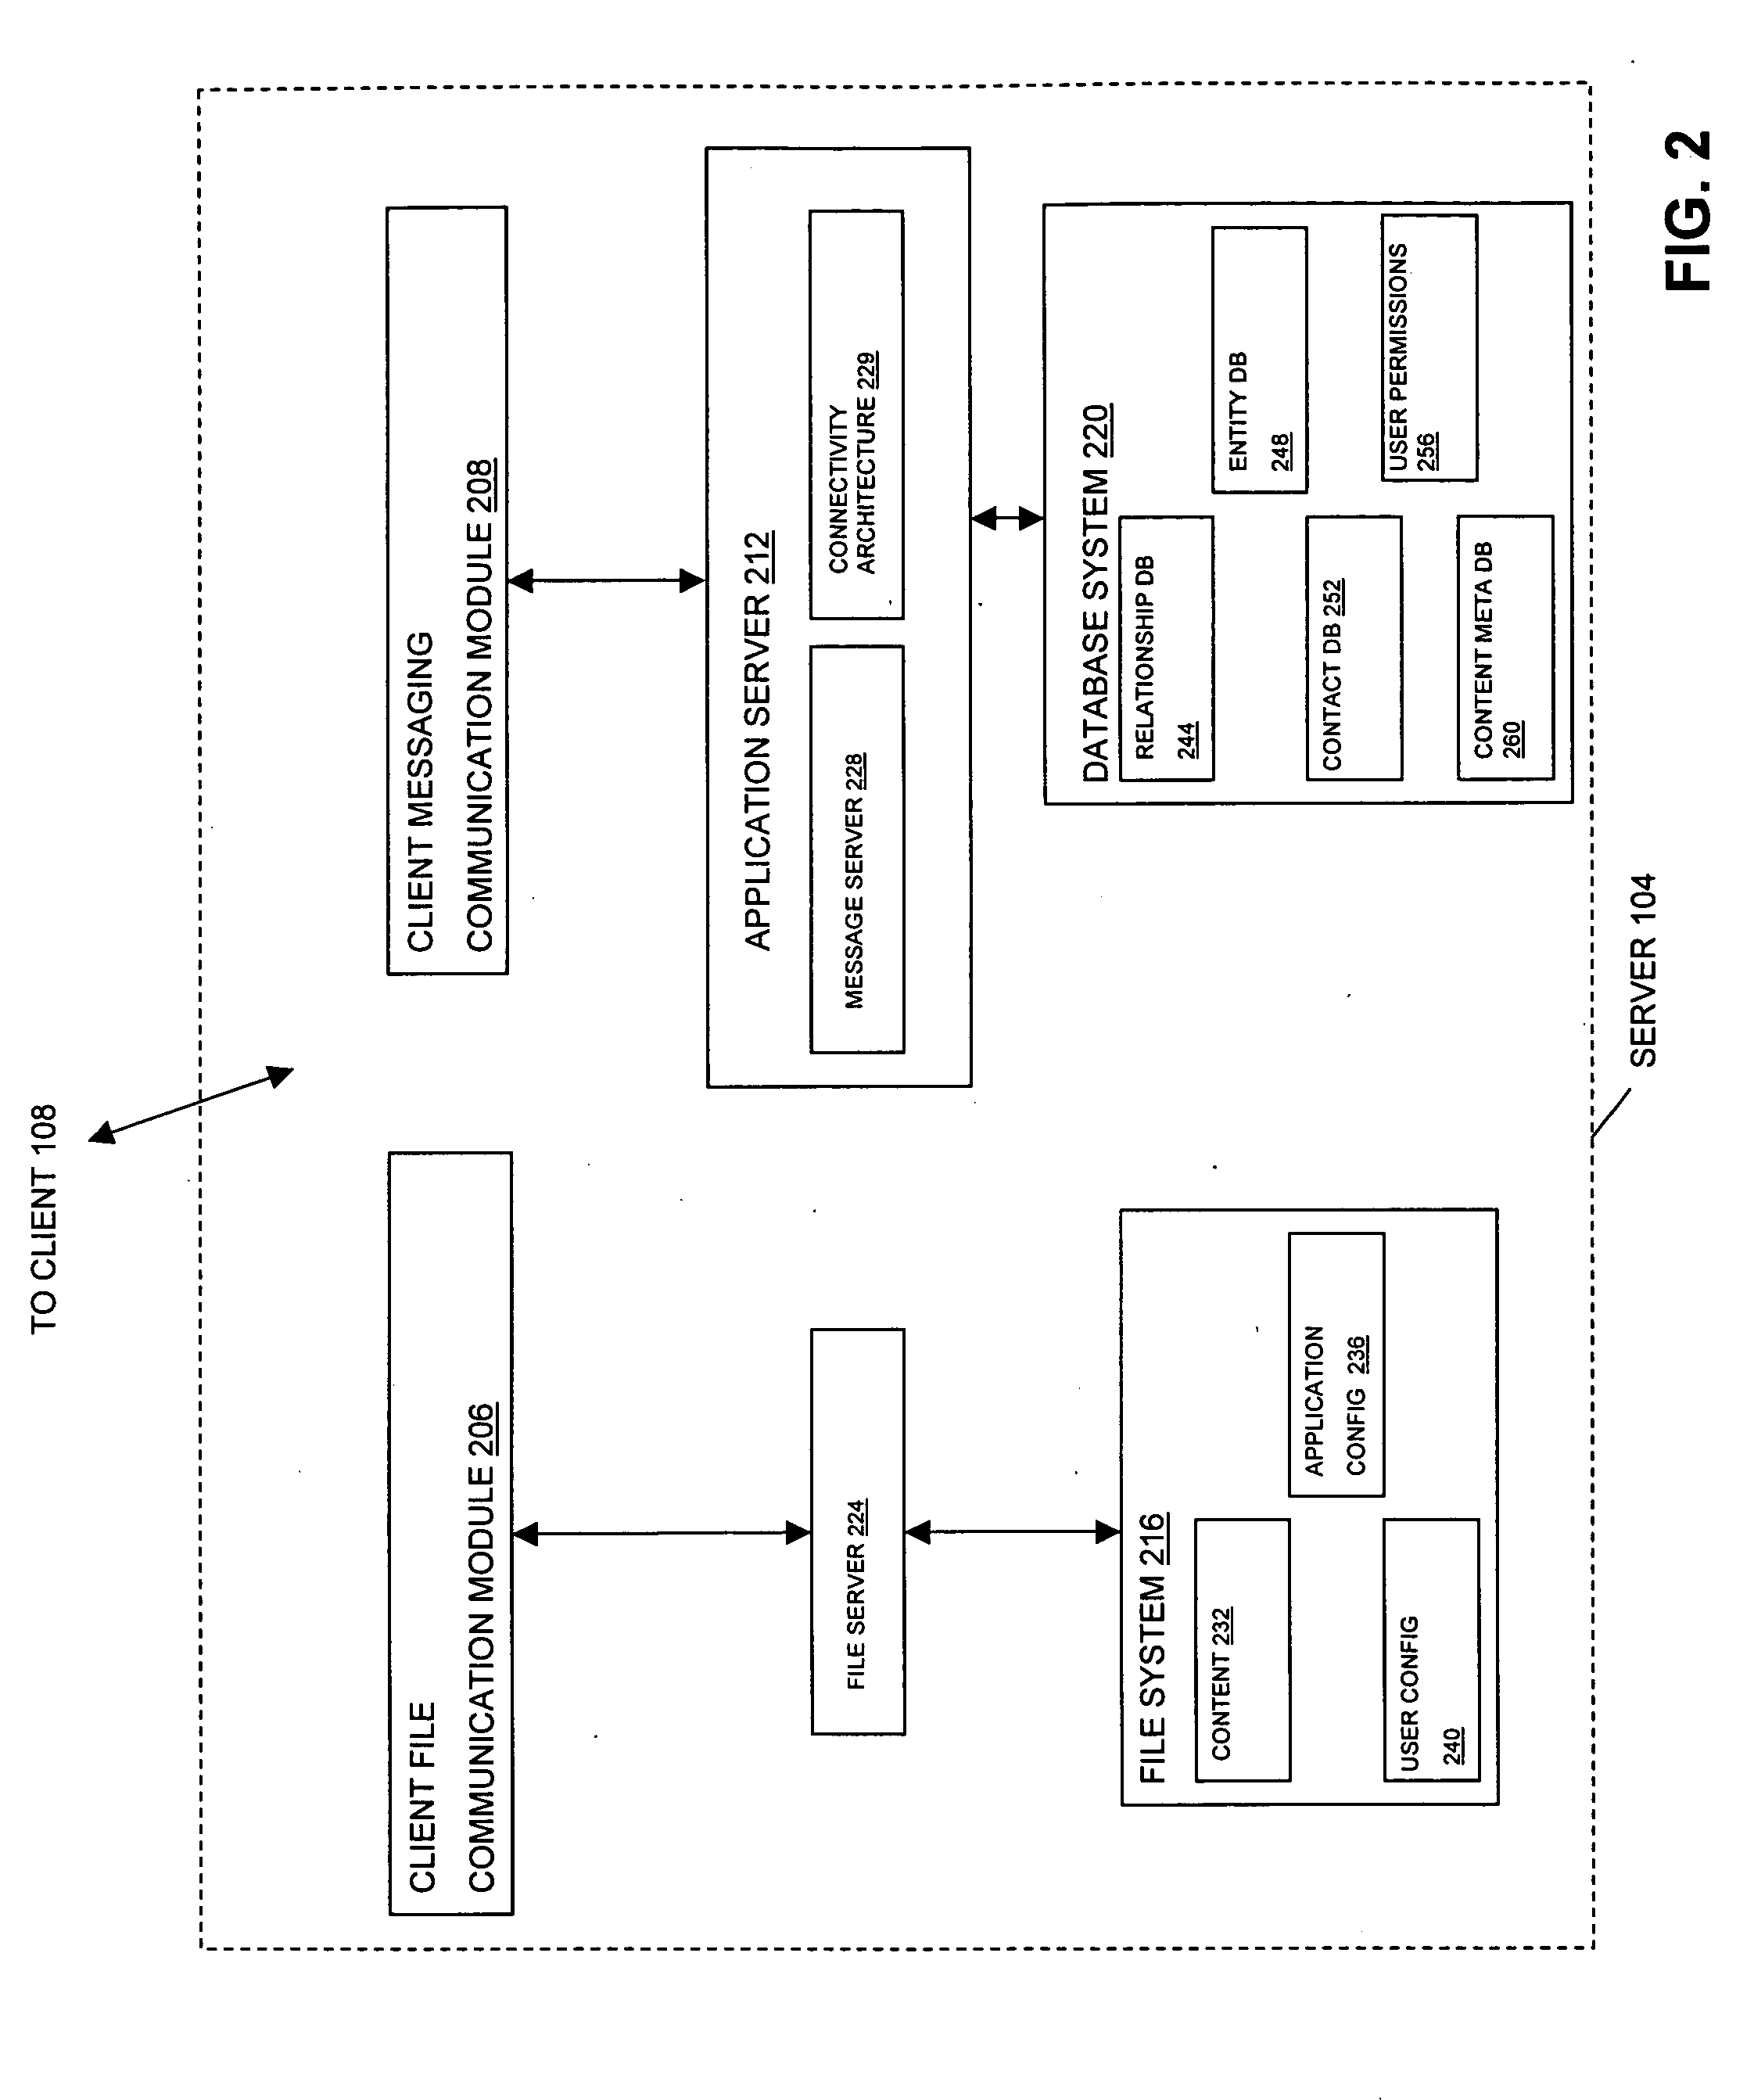 Systems and methods for retrieving data